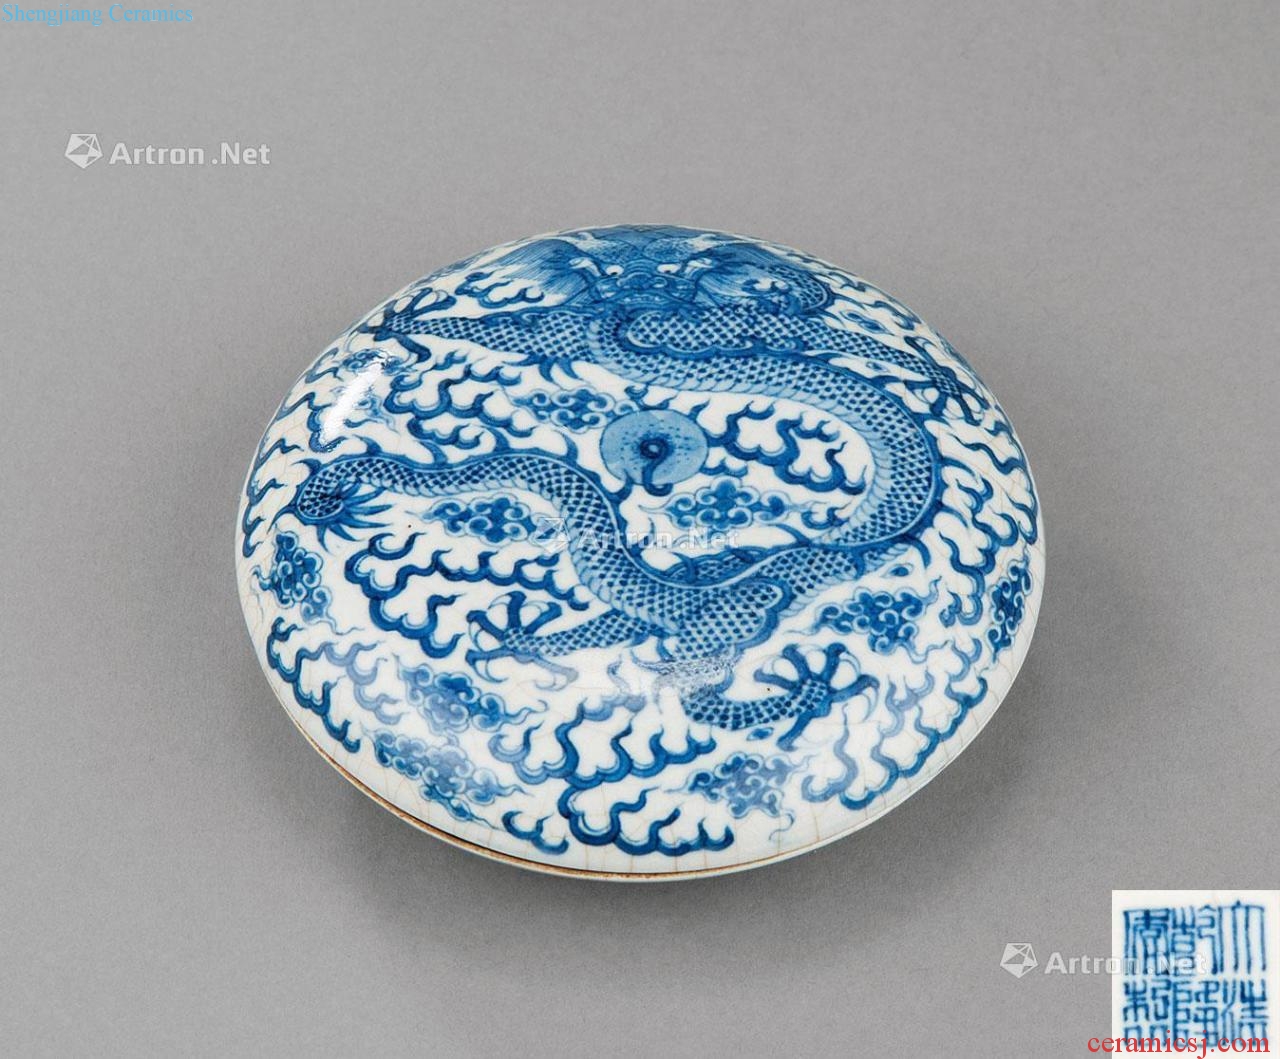 In the qing dynasty Blue and white dragon incense boxes